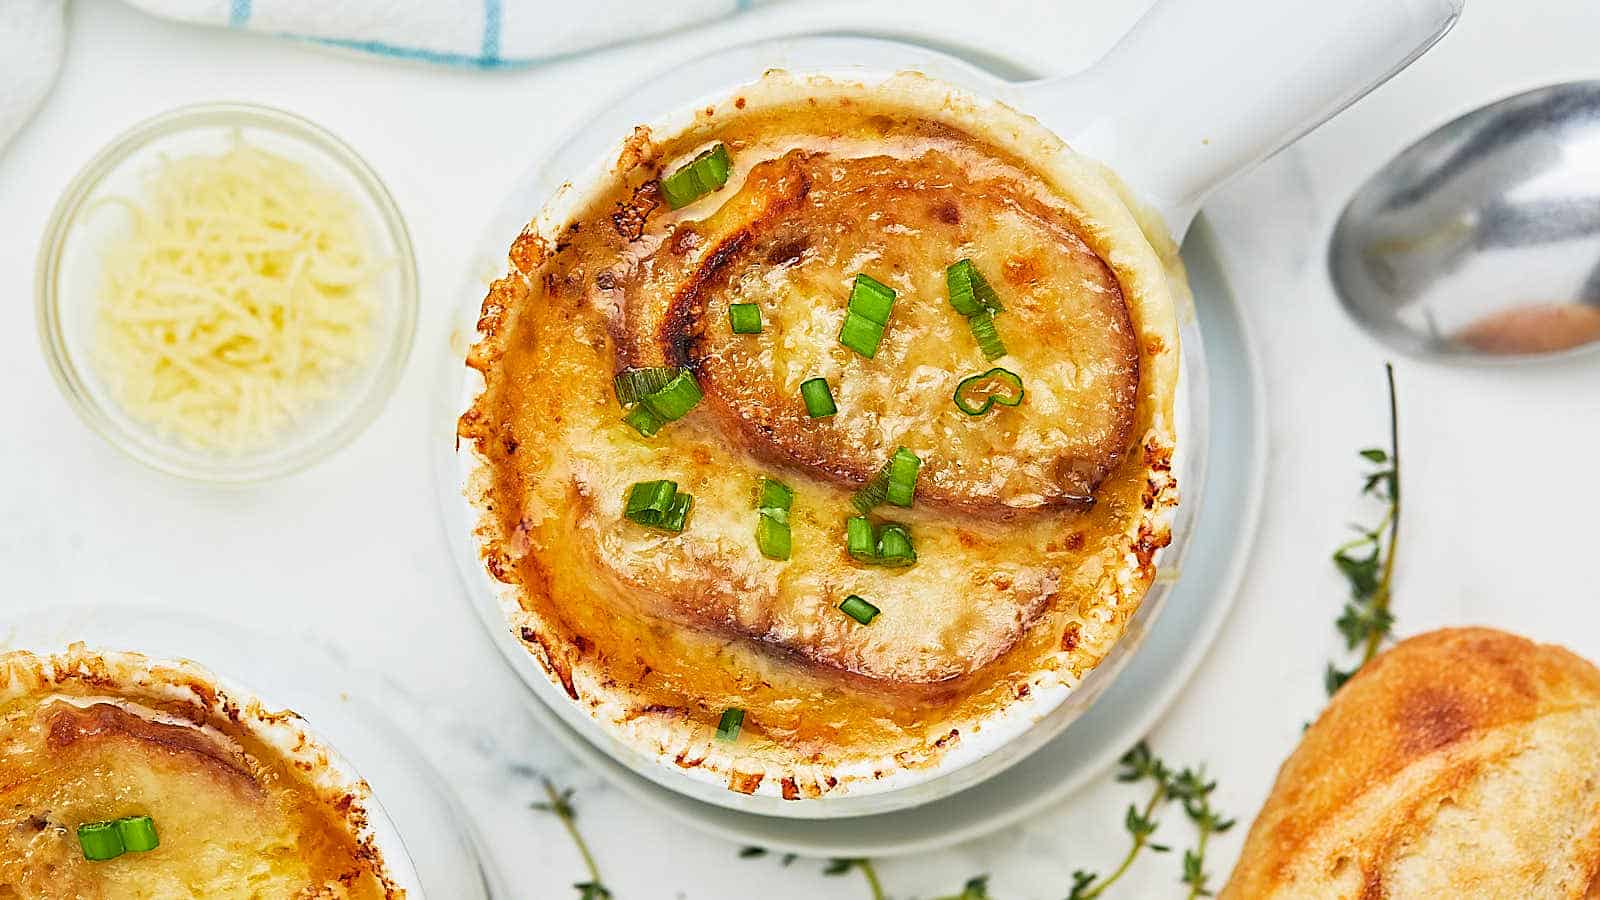 A bowl of french onion soup with bread on the side.